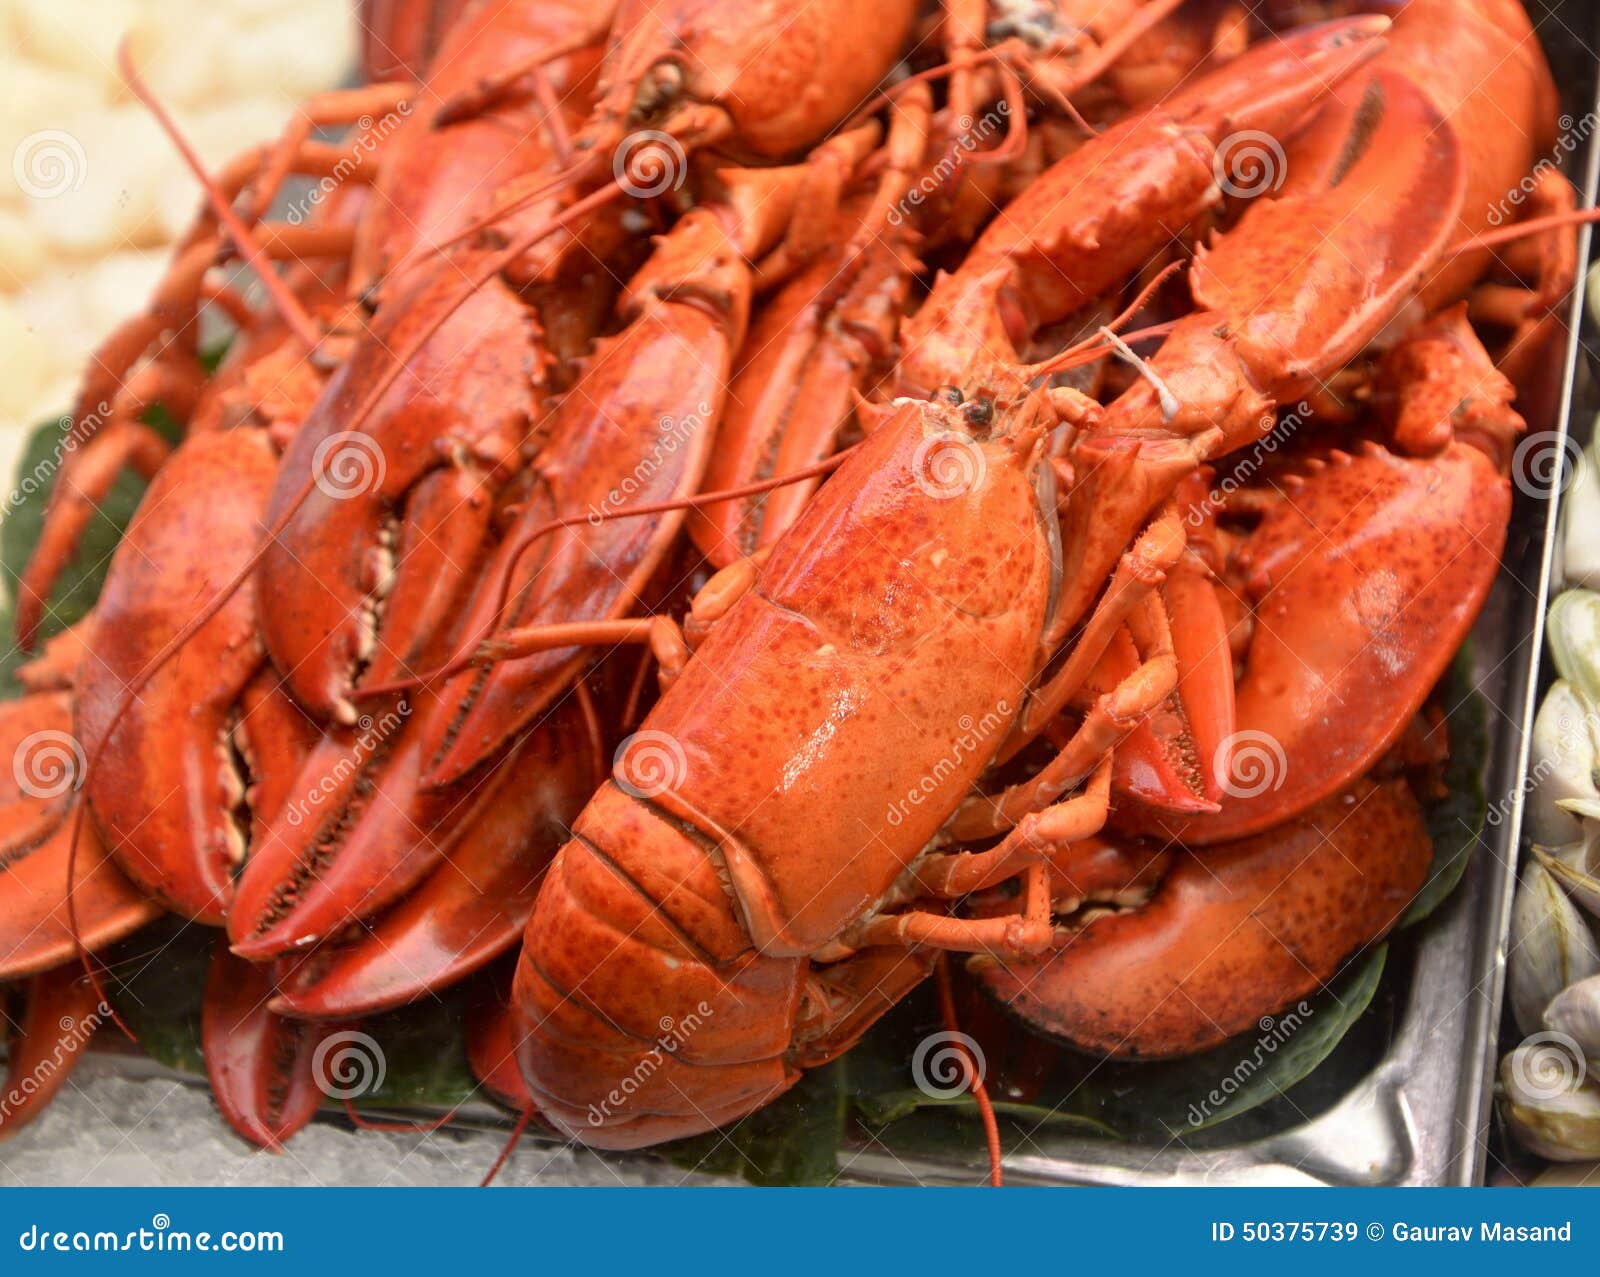 Lobsters Being Sold In Victoria Market Stock Image Image Of Pier Queensland 50375739